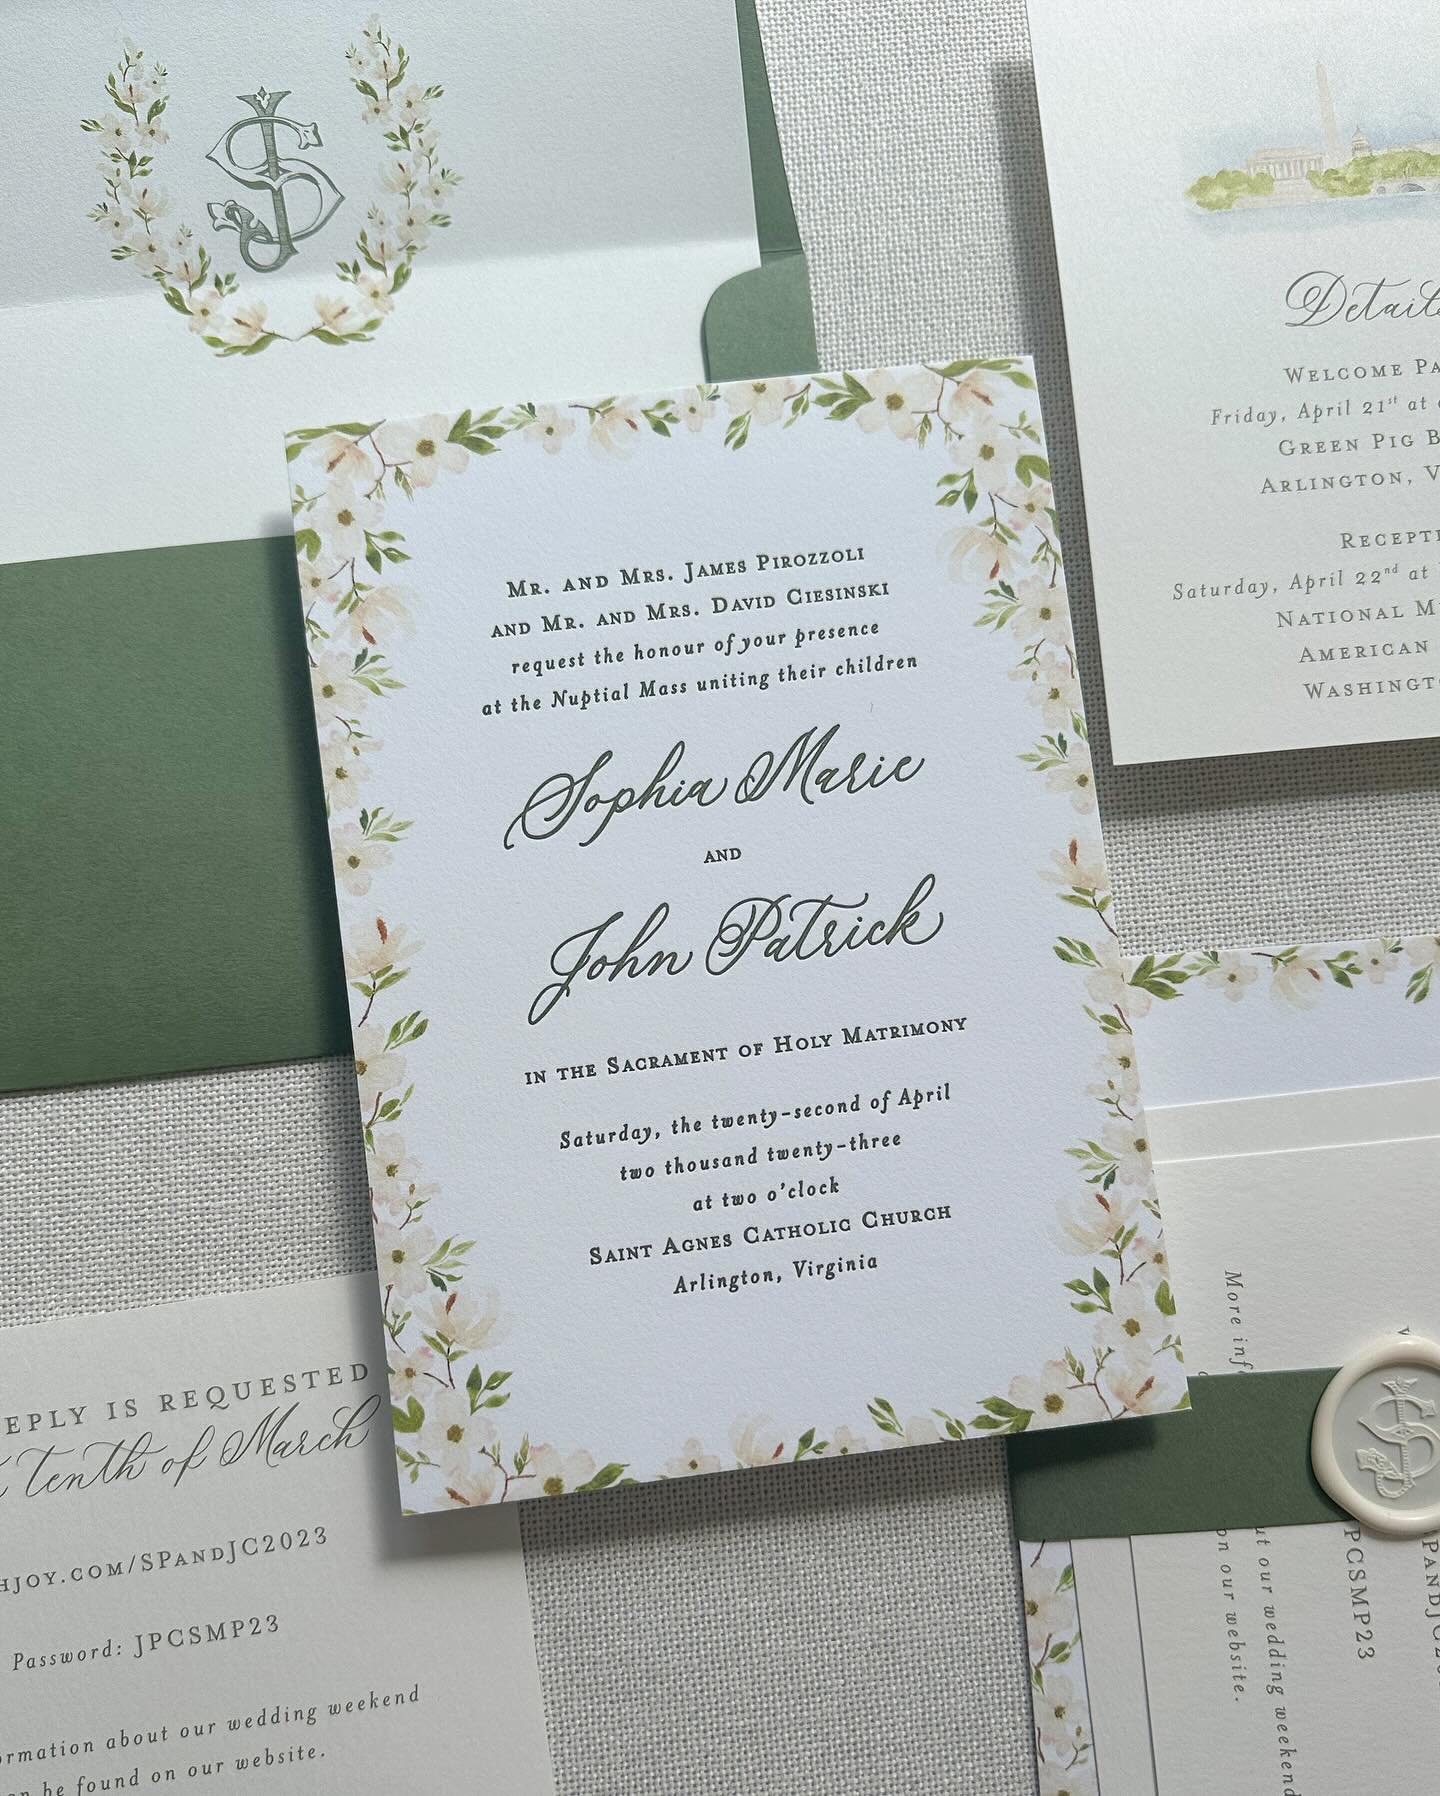 Happy first anniversary to S&amp;J! Their suite was an ode to spring, featuring watercolor dogwood and magnolias. Other details included letterpress invitation card, wax seals with custom monogram and a watercolor of the DC skyline on their detail ca